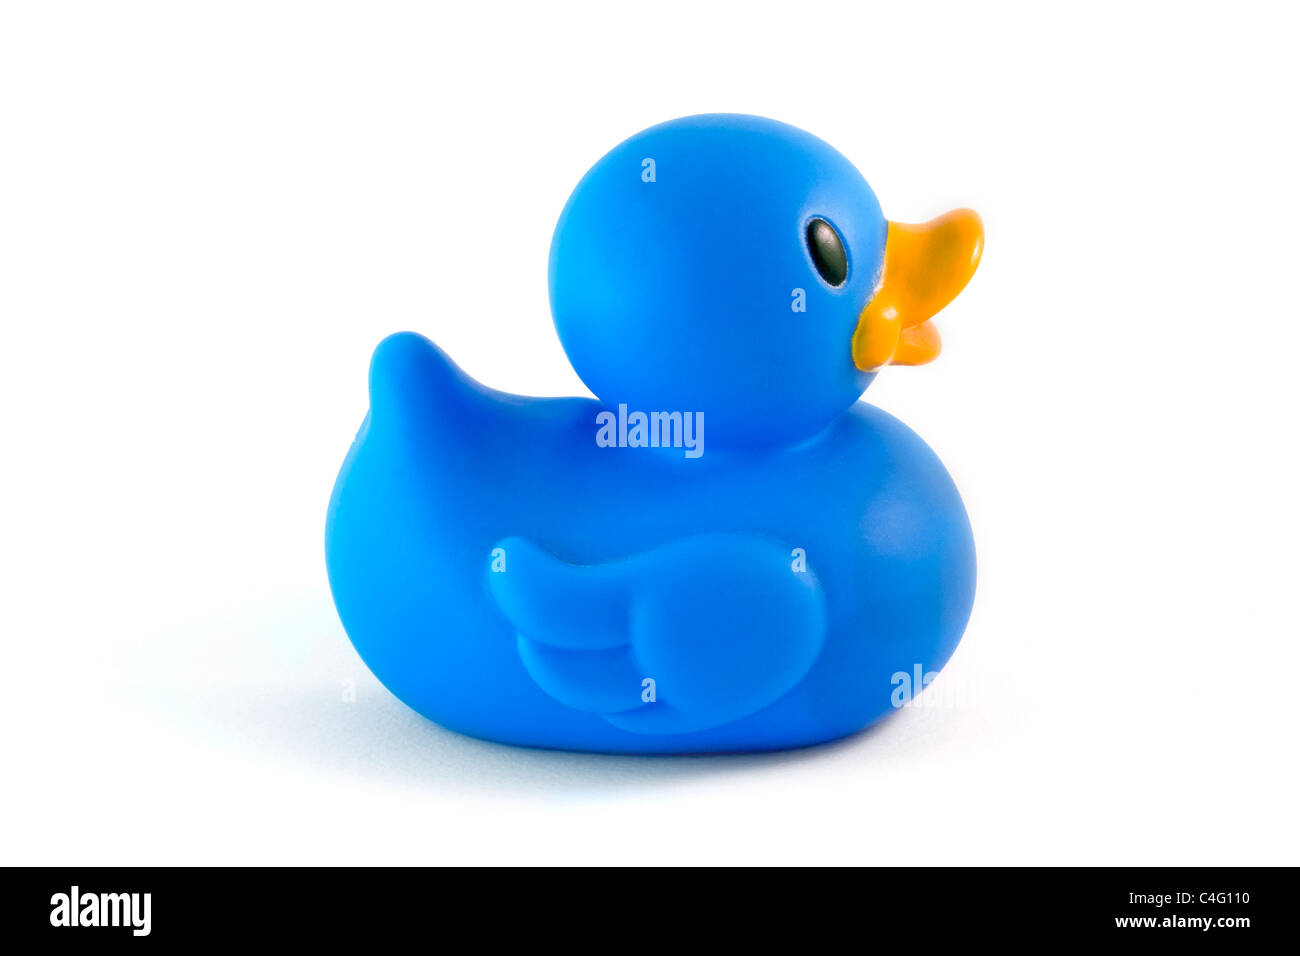 single blue rubber duck side view isolated over white Stock Photo